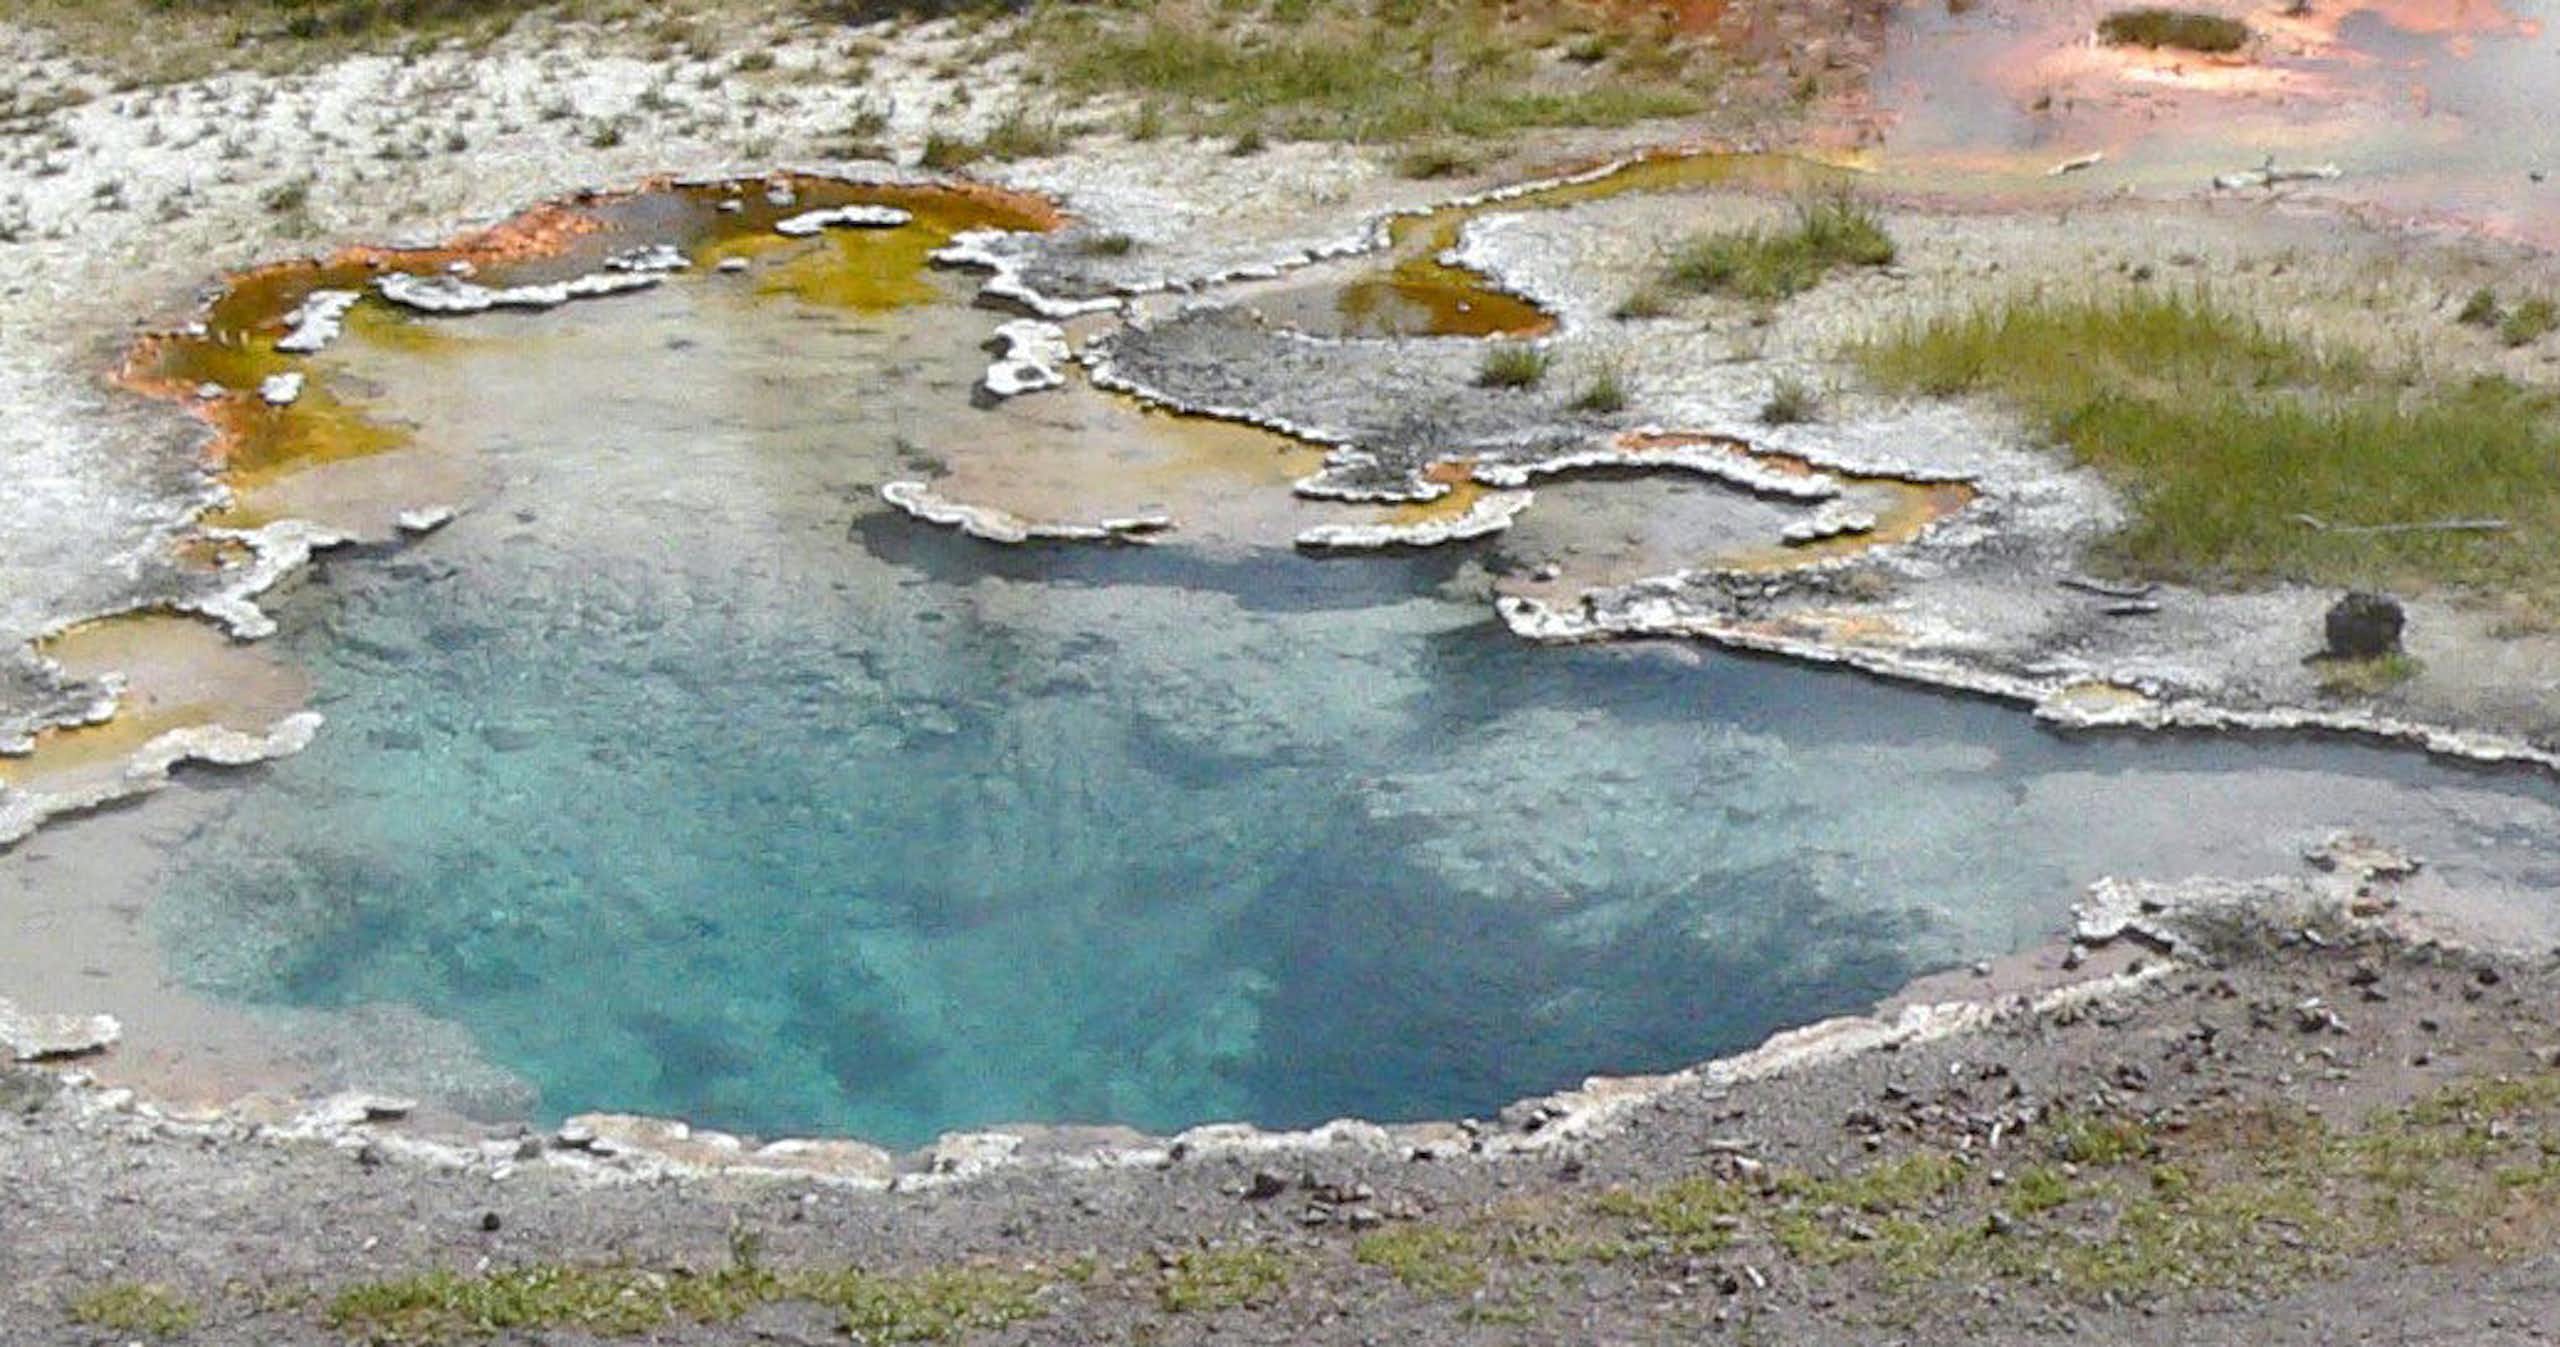 A pond with clear water and yellow substances on its edges